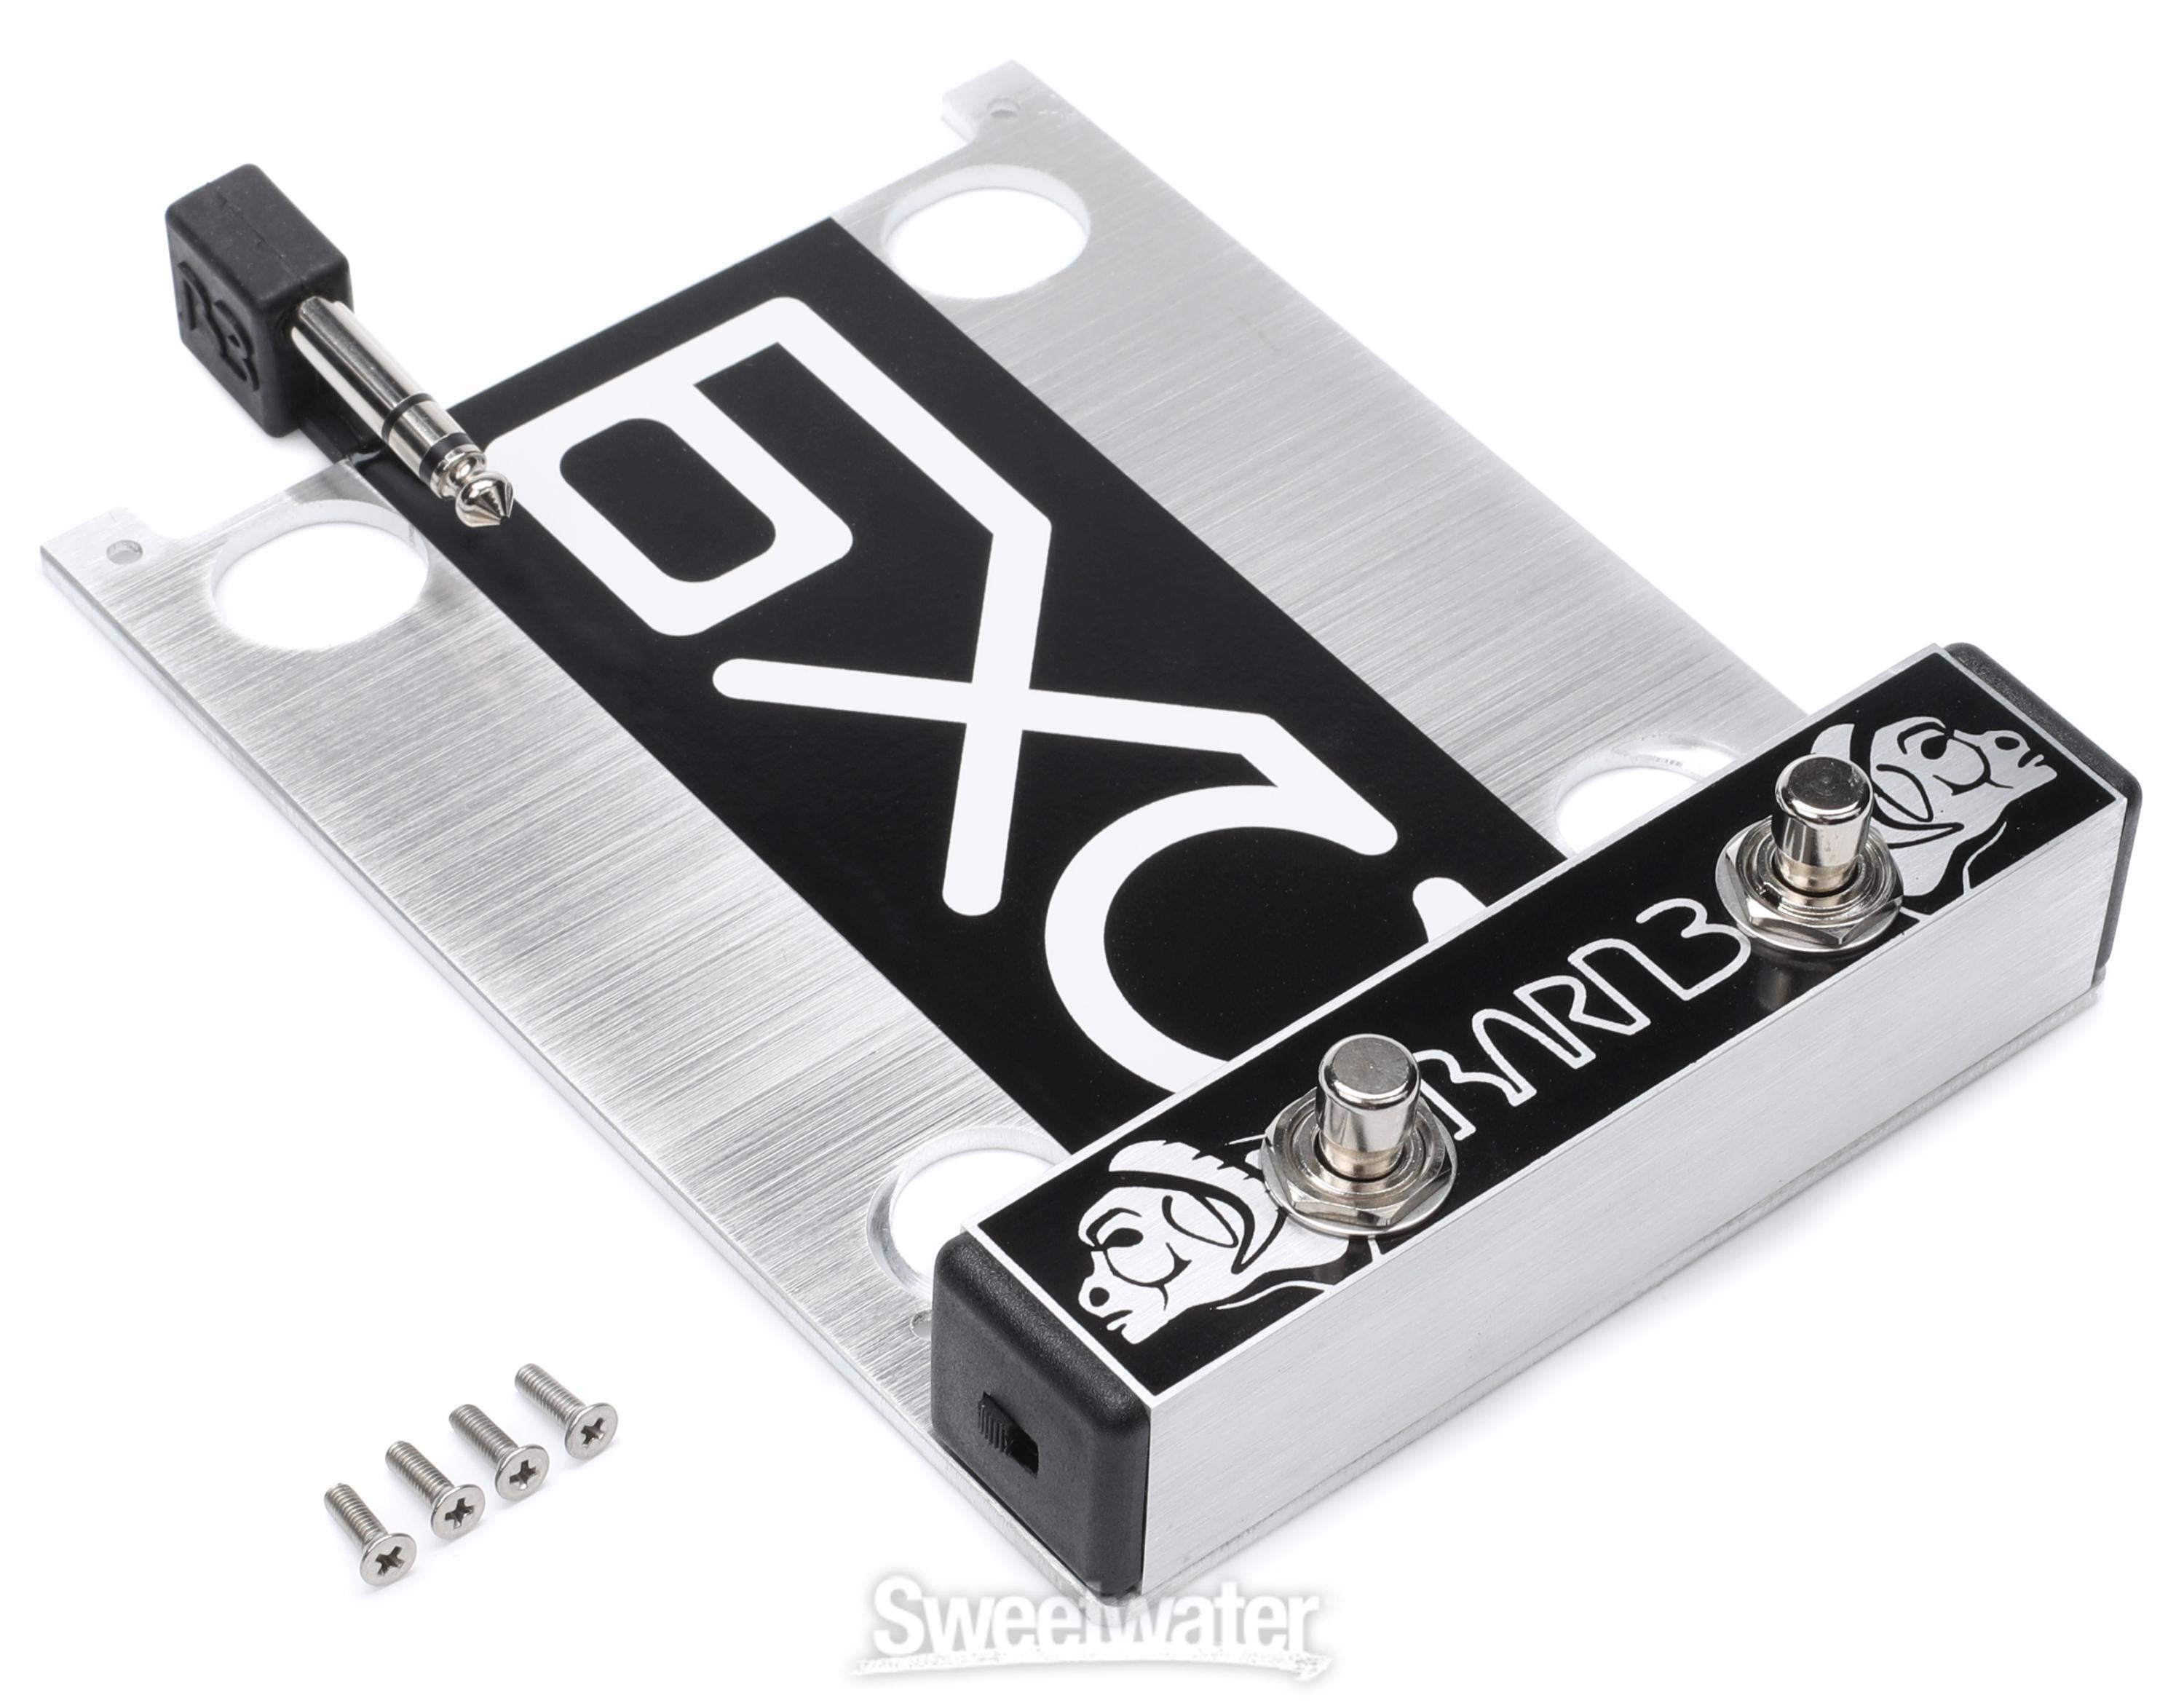 Eventide Barn3 OX-9 Auxiliary Switch for H9 Pedals | Sweetwater